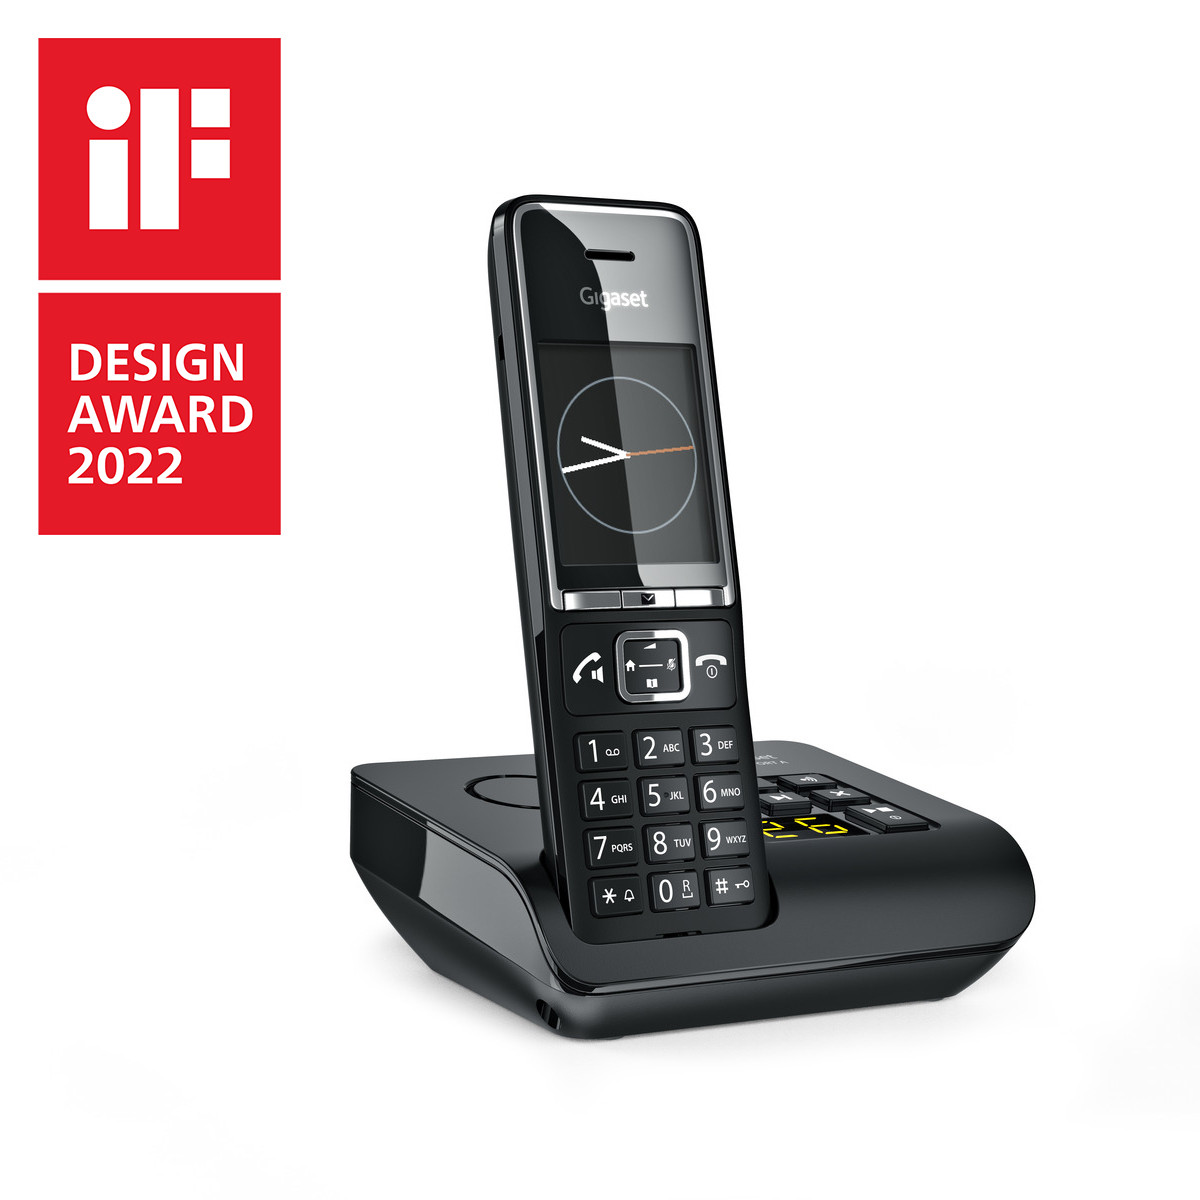 Discover Gigaset COMFORT 550 cordless phone with comfort features